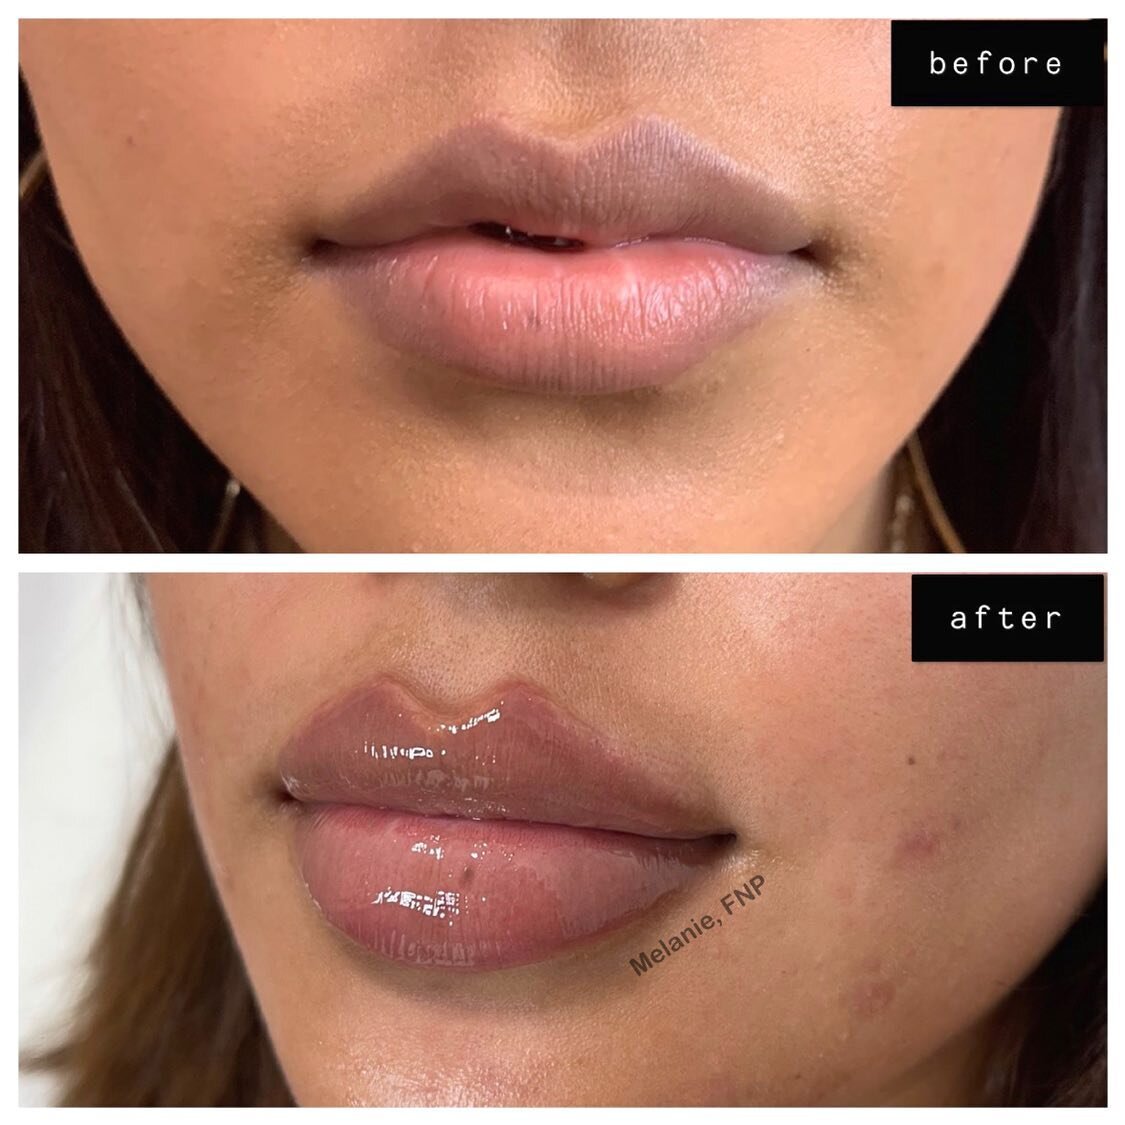 2 syringes done 6 months apart (final results photo was taken after 2nd syringe)💖
BORDER REFINEMENT + RUSSIAN LIPS

What do you guys think of these results?😻⬇️

#russianlips#Juvederm#Restylane#Voluma#Botox#Dysport#Kybella#aesthetics#dermalfiller#li